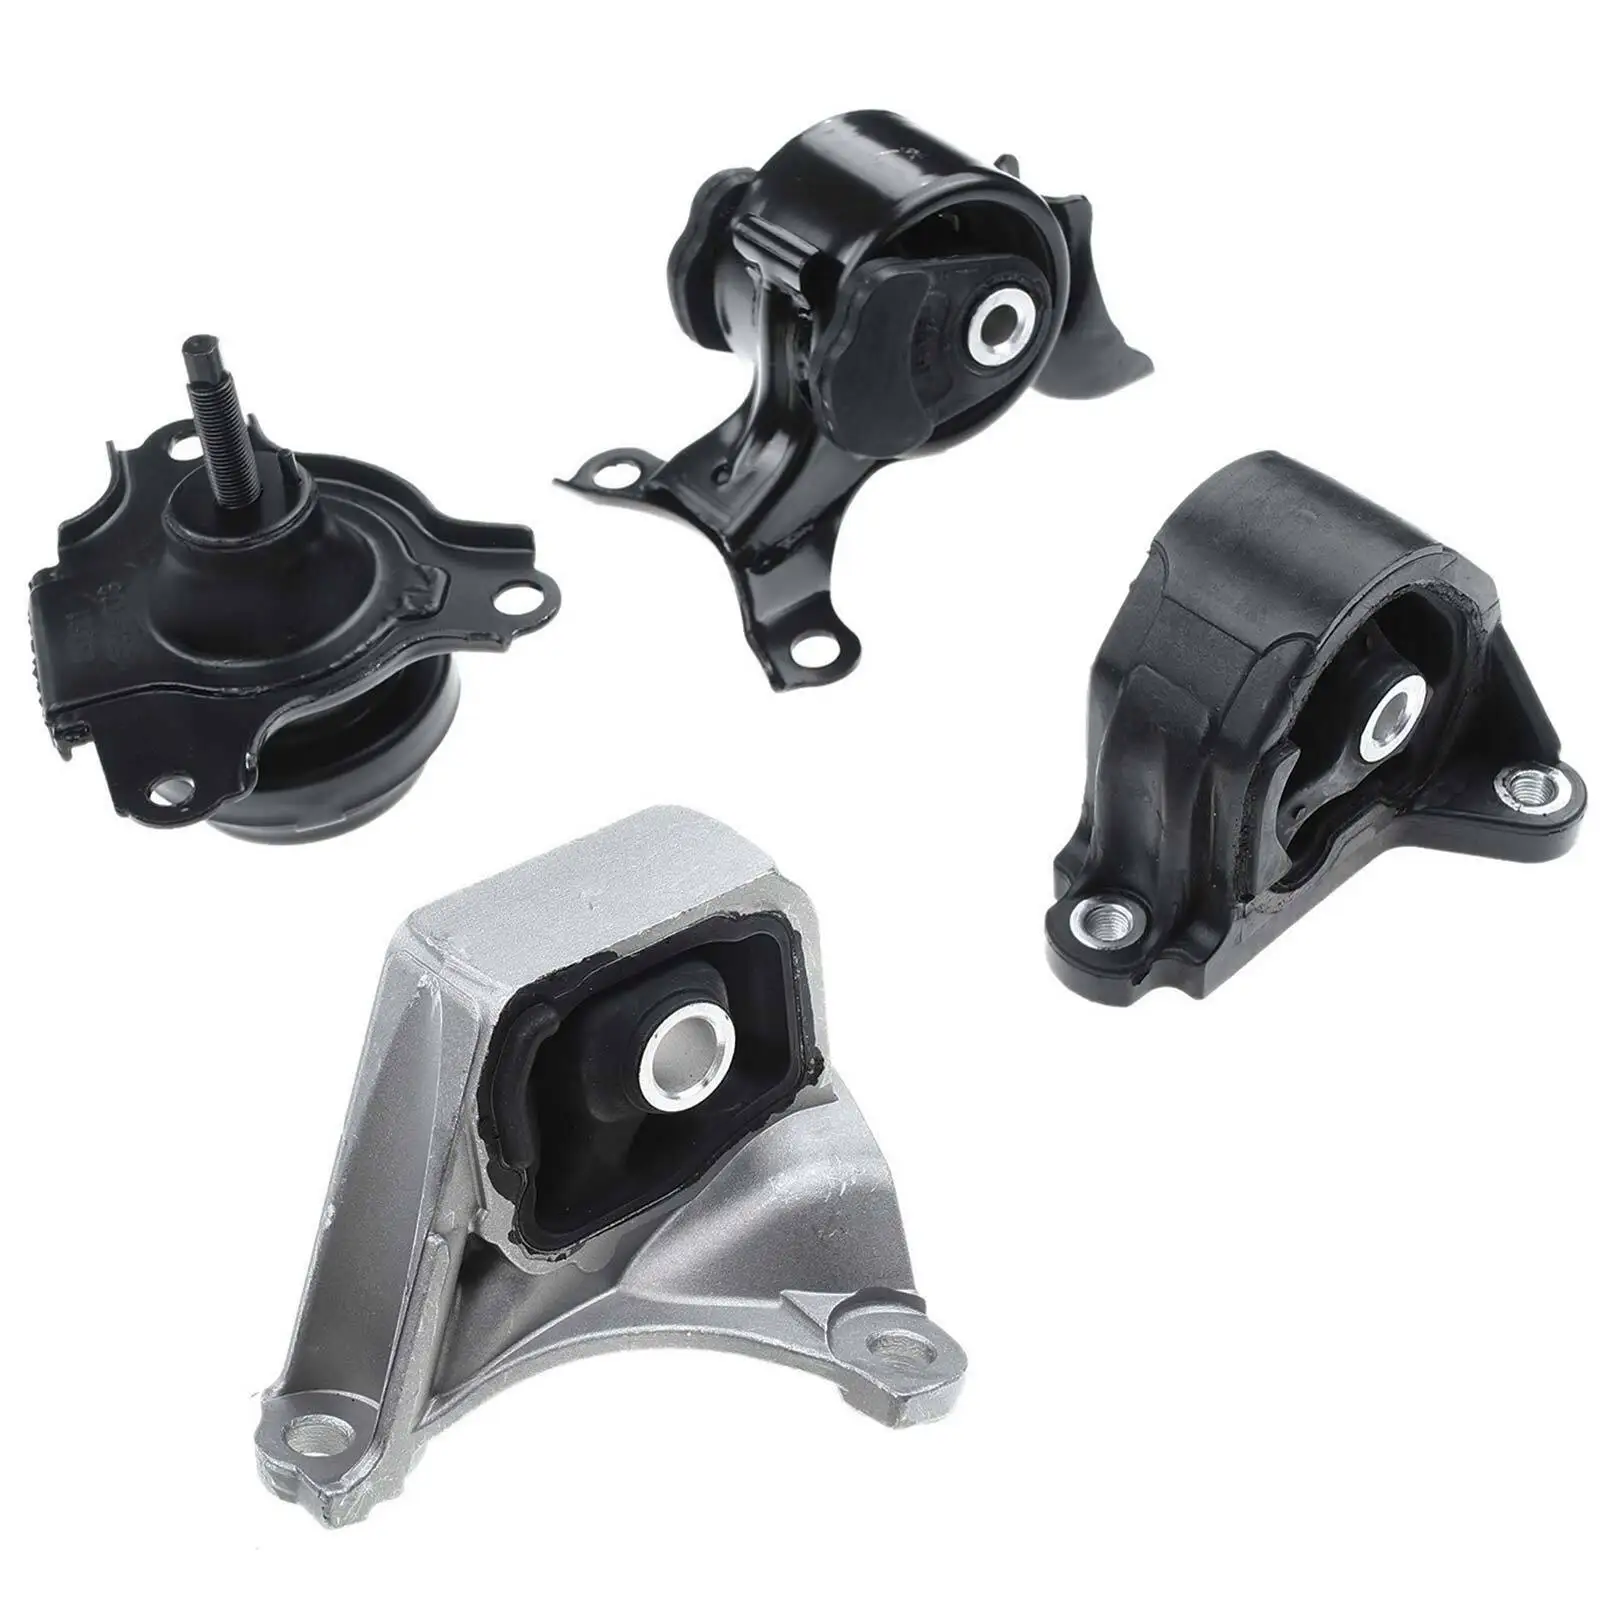 

In-stock CN US 4x Engine Motor Trans Mount for Honda Civic 02-05 Coupe Acura RSX 2.0L Manual A4503